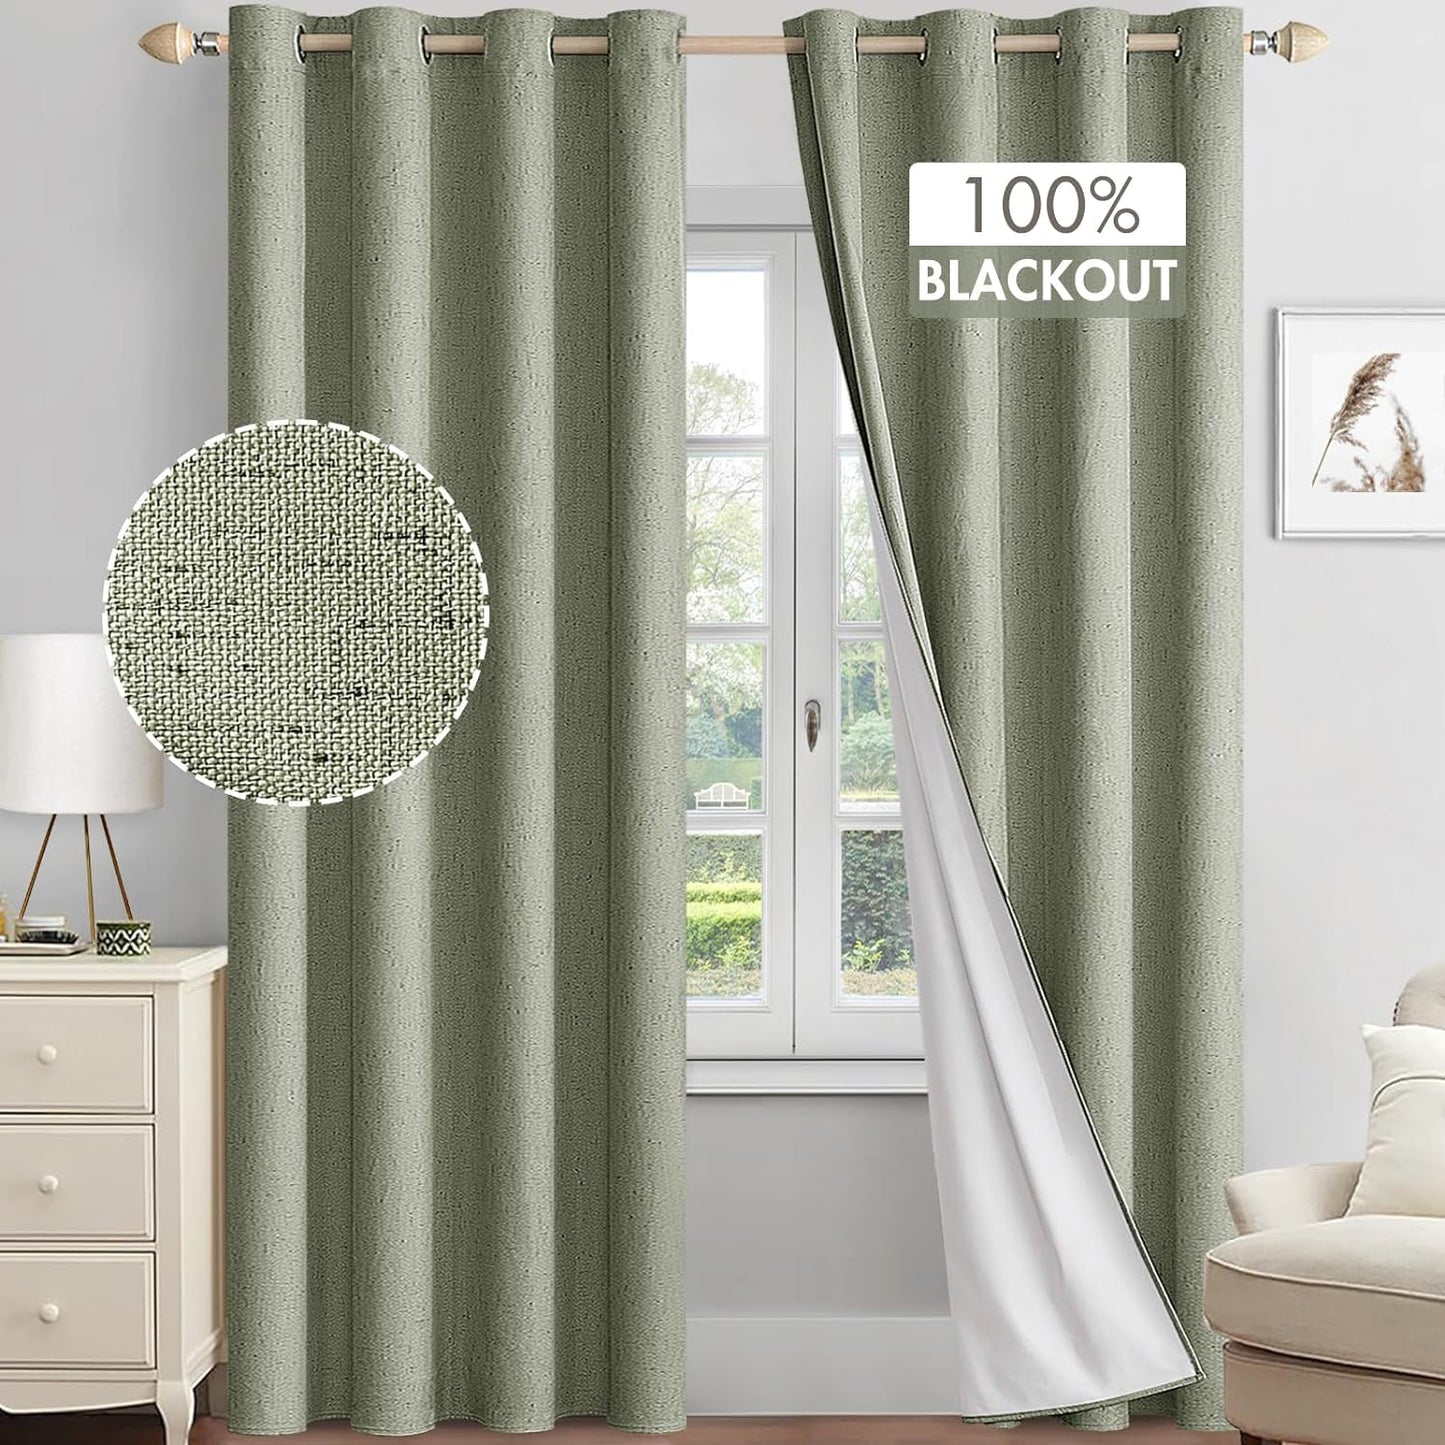 MIULEE Linen Textured 100% Blackout Curtains for Bedroom 84 Inches Long Natural Beige Thermal Insulated Black Out Curtains/Draperies with White Liner for Living Room/Nursery, Grommet Top, 2 Panels  MIULEE Sage Green W52Xl90 